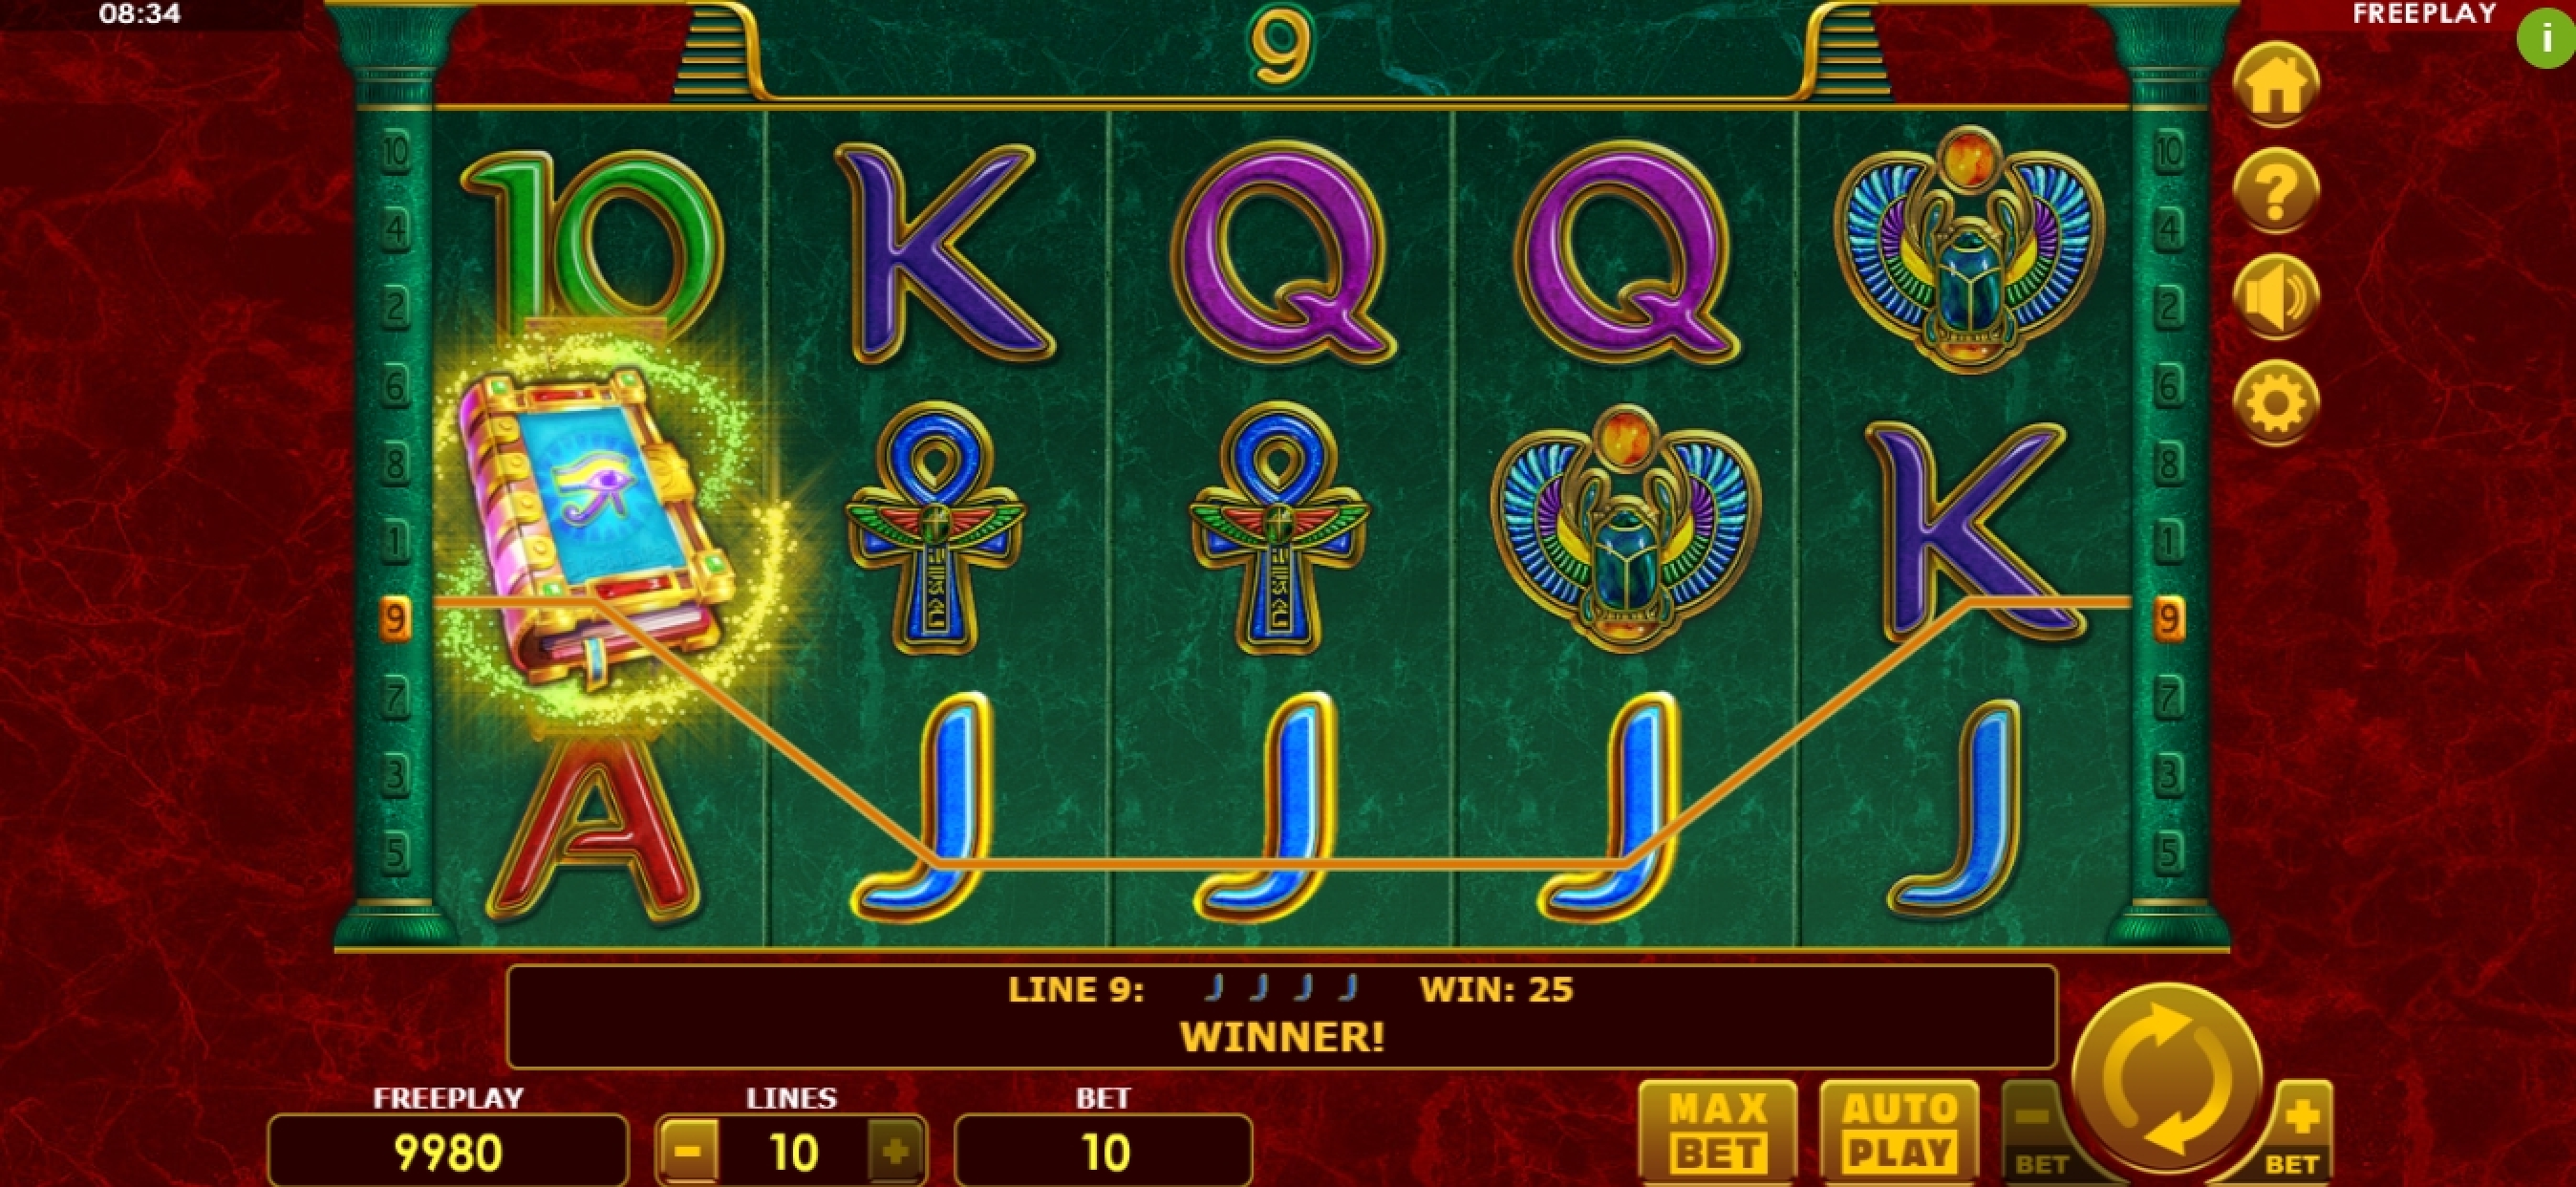 Win Money in Book of Pharao Free Slot Game by Amatic Industries